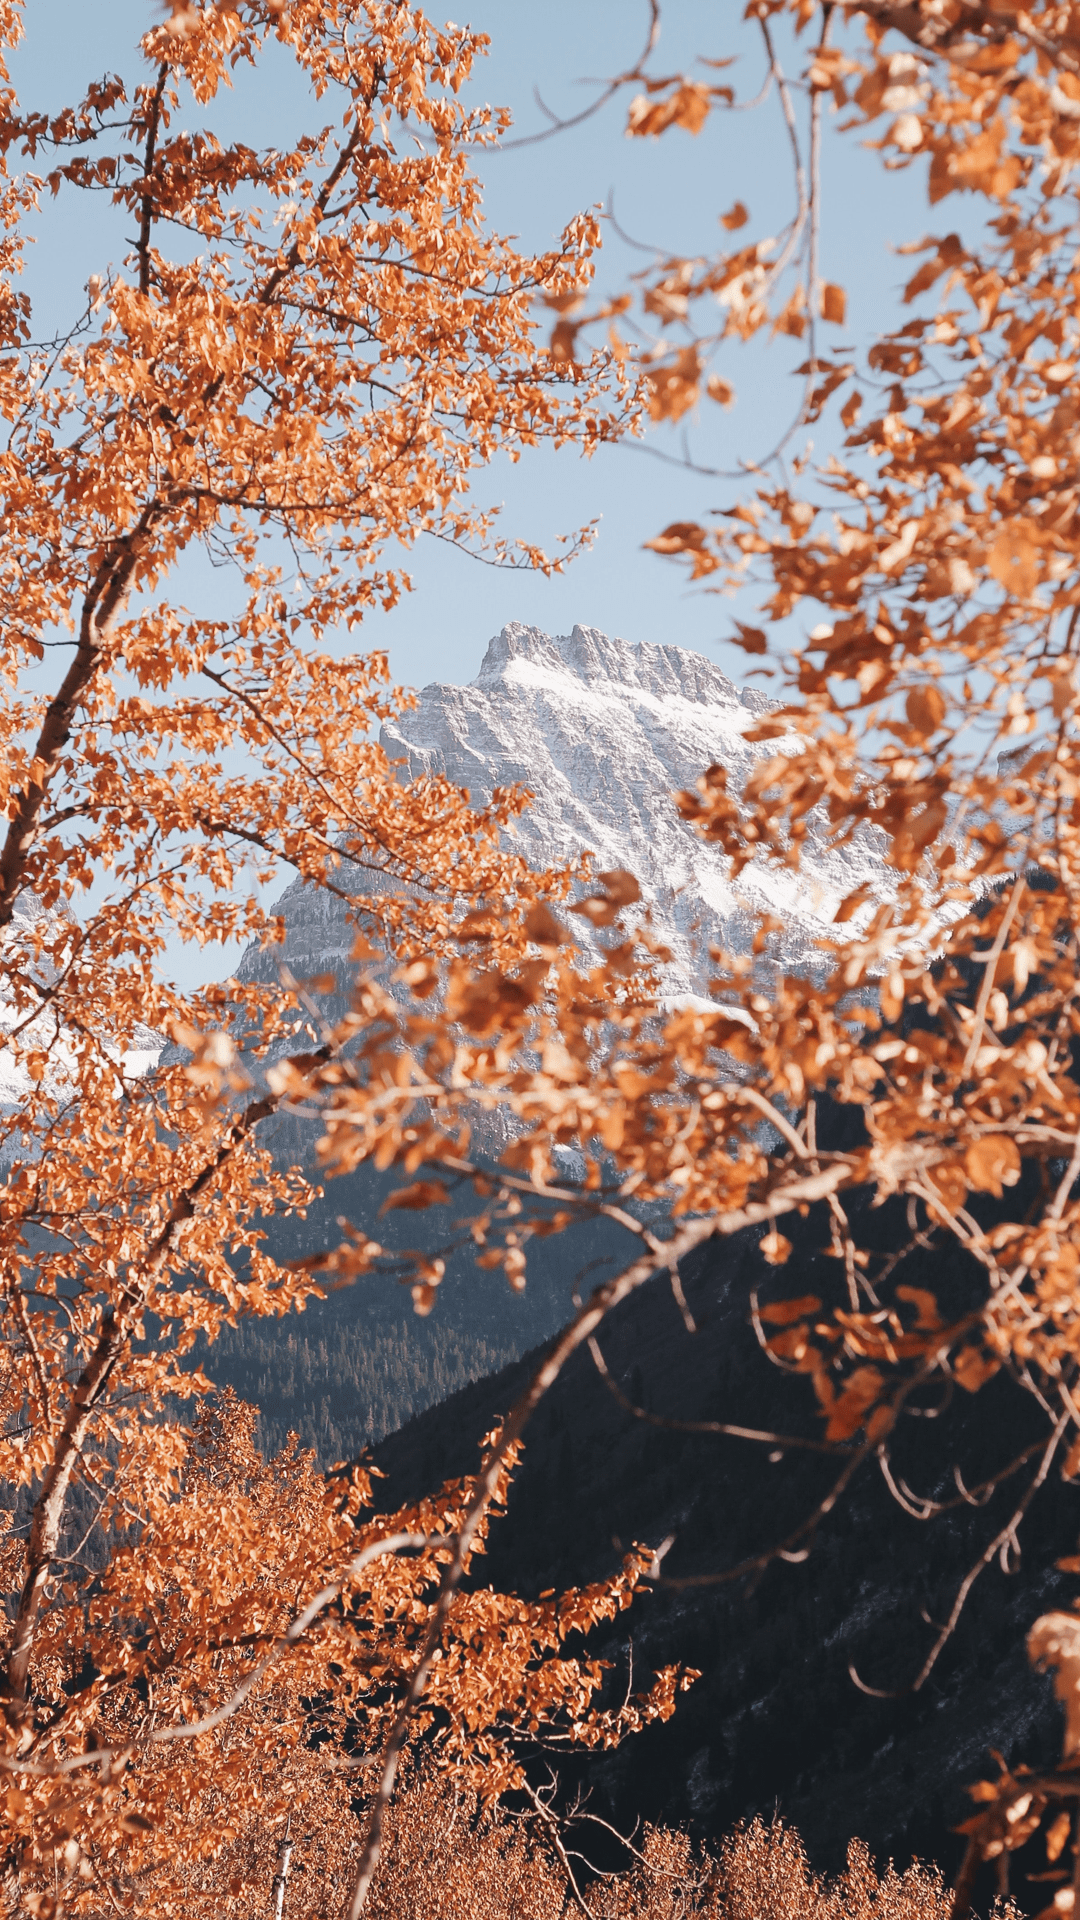 Fall Wallpaper Background For iPhone: Stunning Free HD Autumn Image. Glory of the Snow